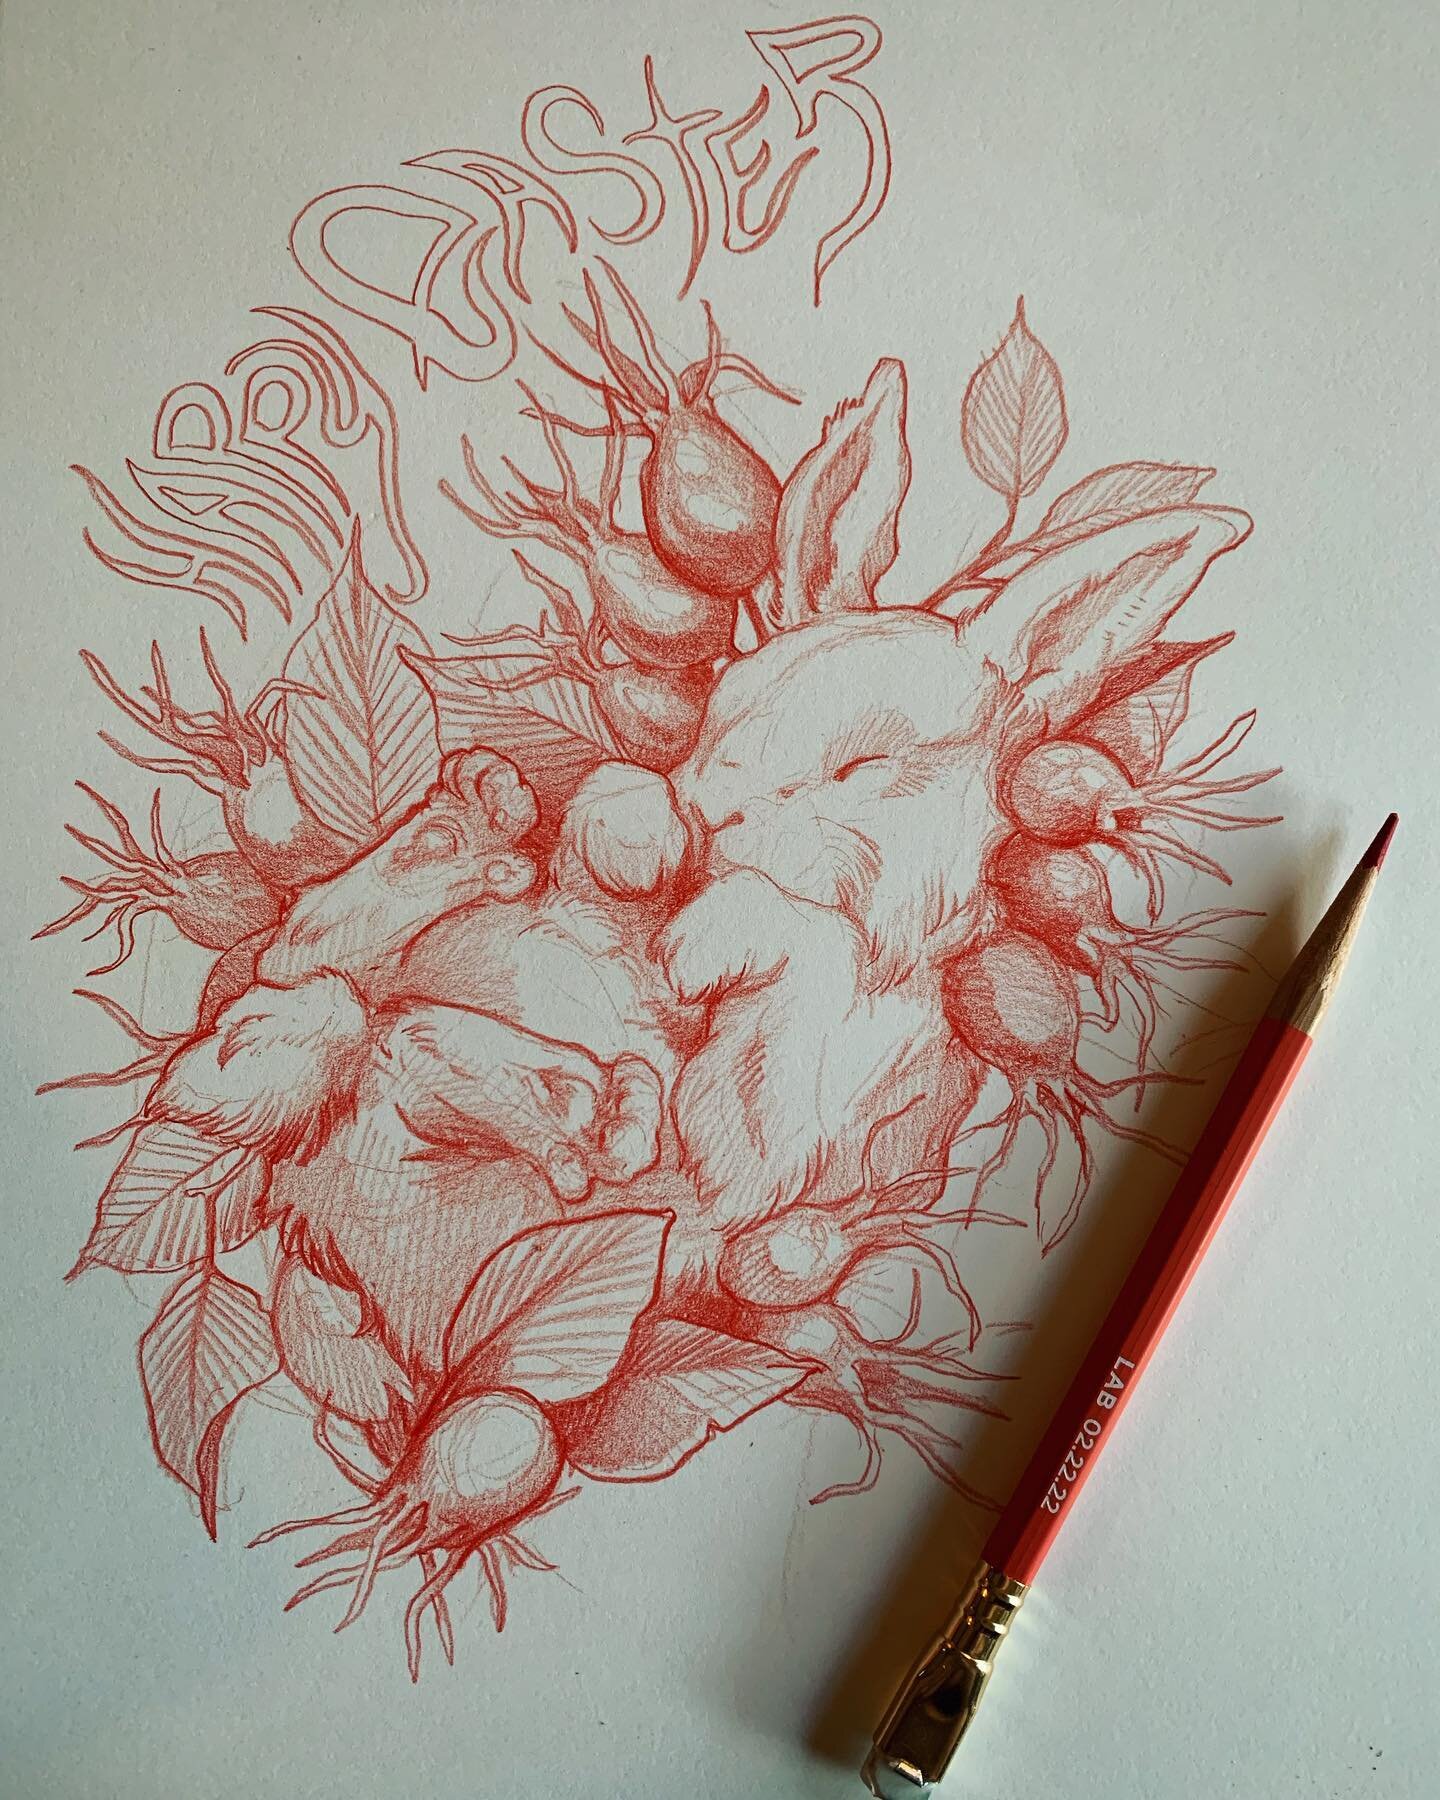 Thanks everyone for joining the livestream tonight! I&rsquo;ll be doing this again on Wednesday at 6pm central.
Have a wonderful Easter! 
#redpencilsketch #blackwing #bunniesofinstagram #babyanimals #organicart #tattooart #okctattooartist #crappanthe